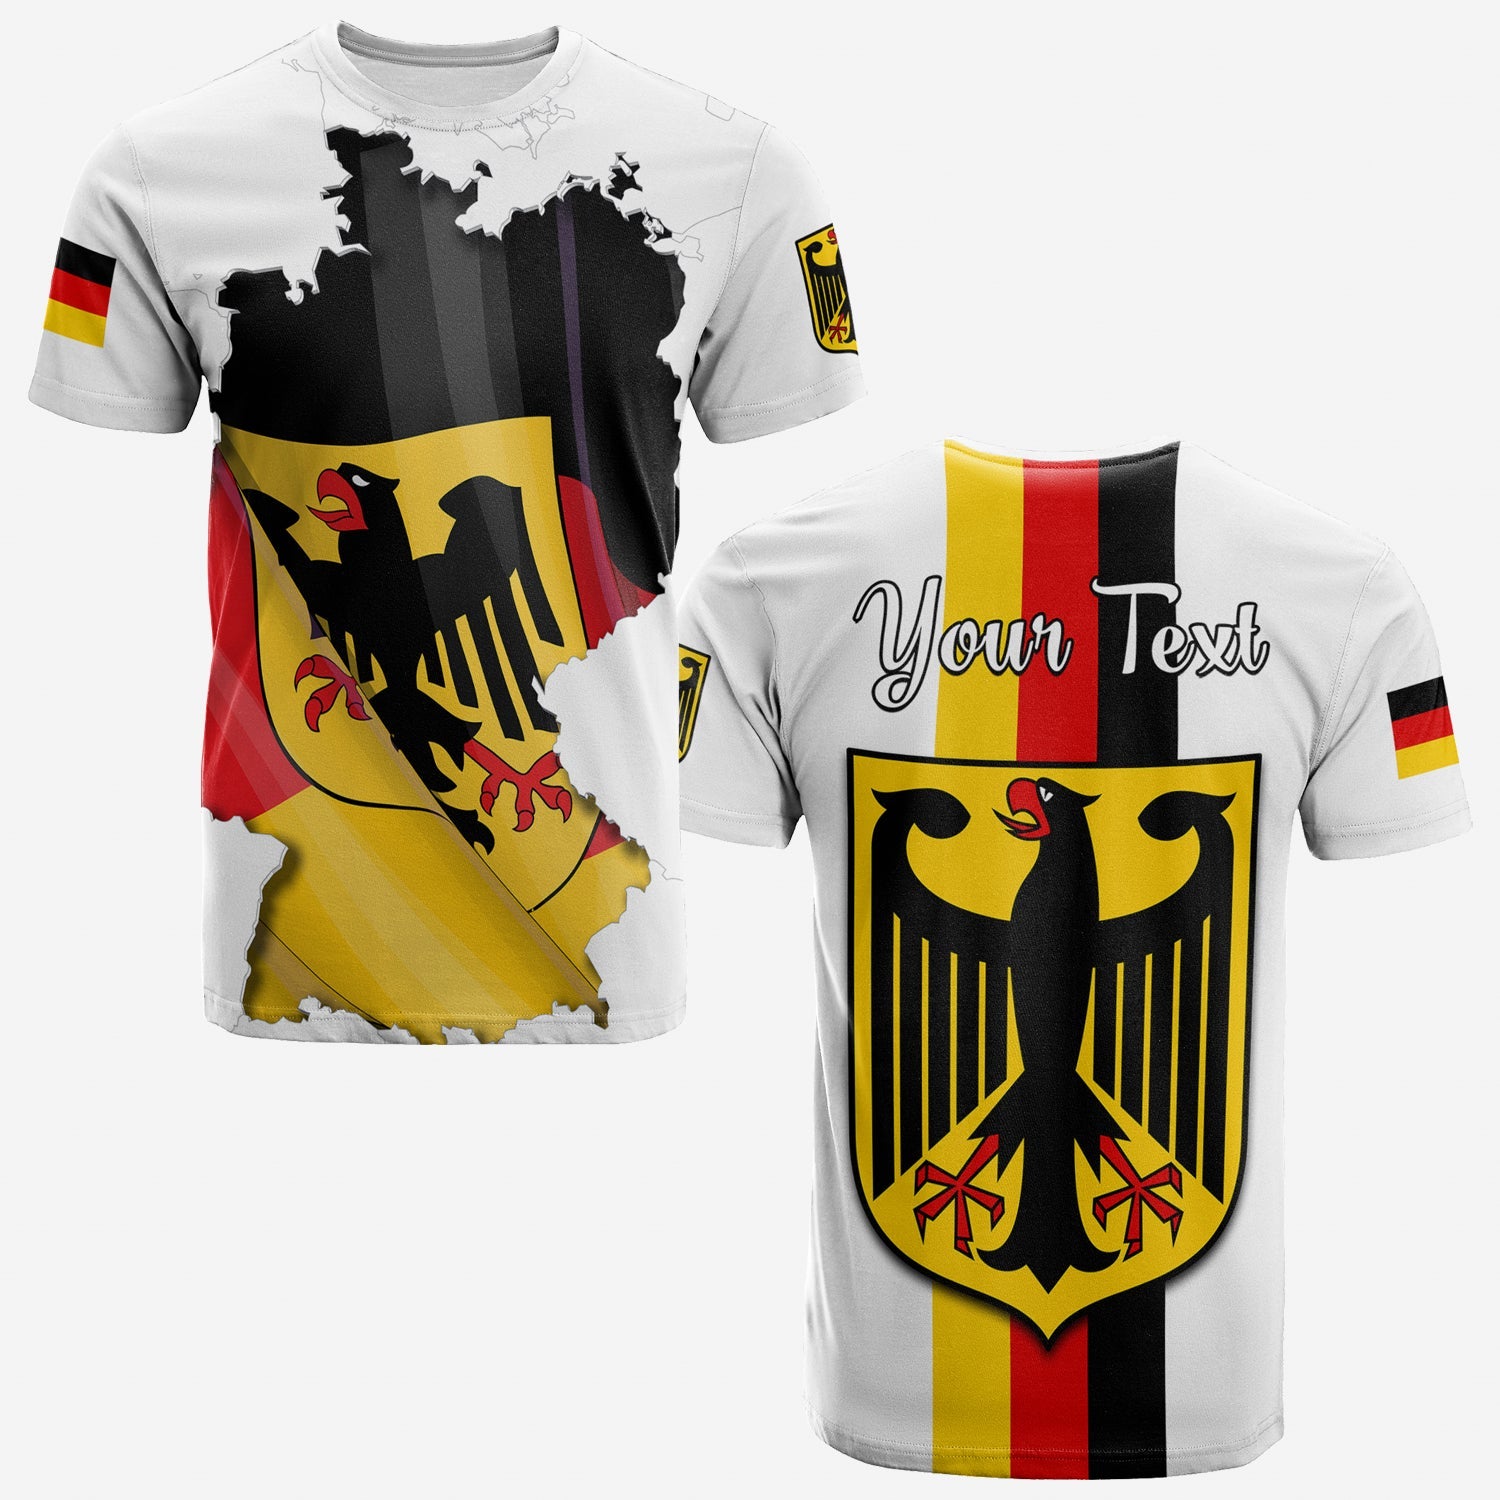 custom-personalised-germany-t-shirt-grunge-deutschland-map-and-coat-of-arms